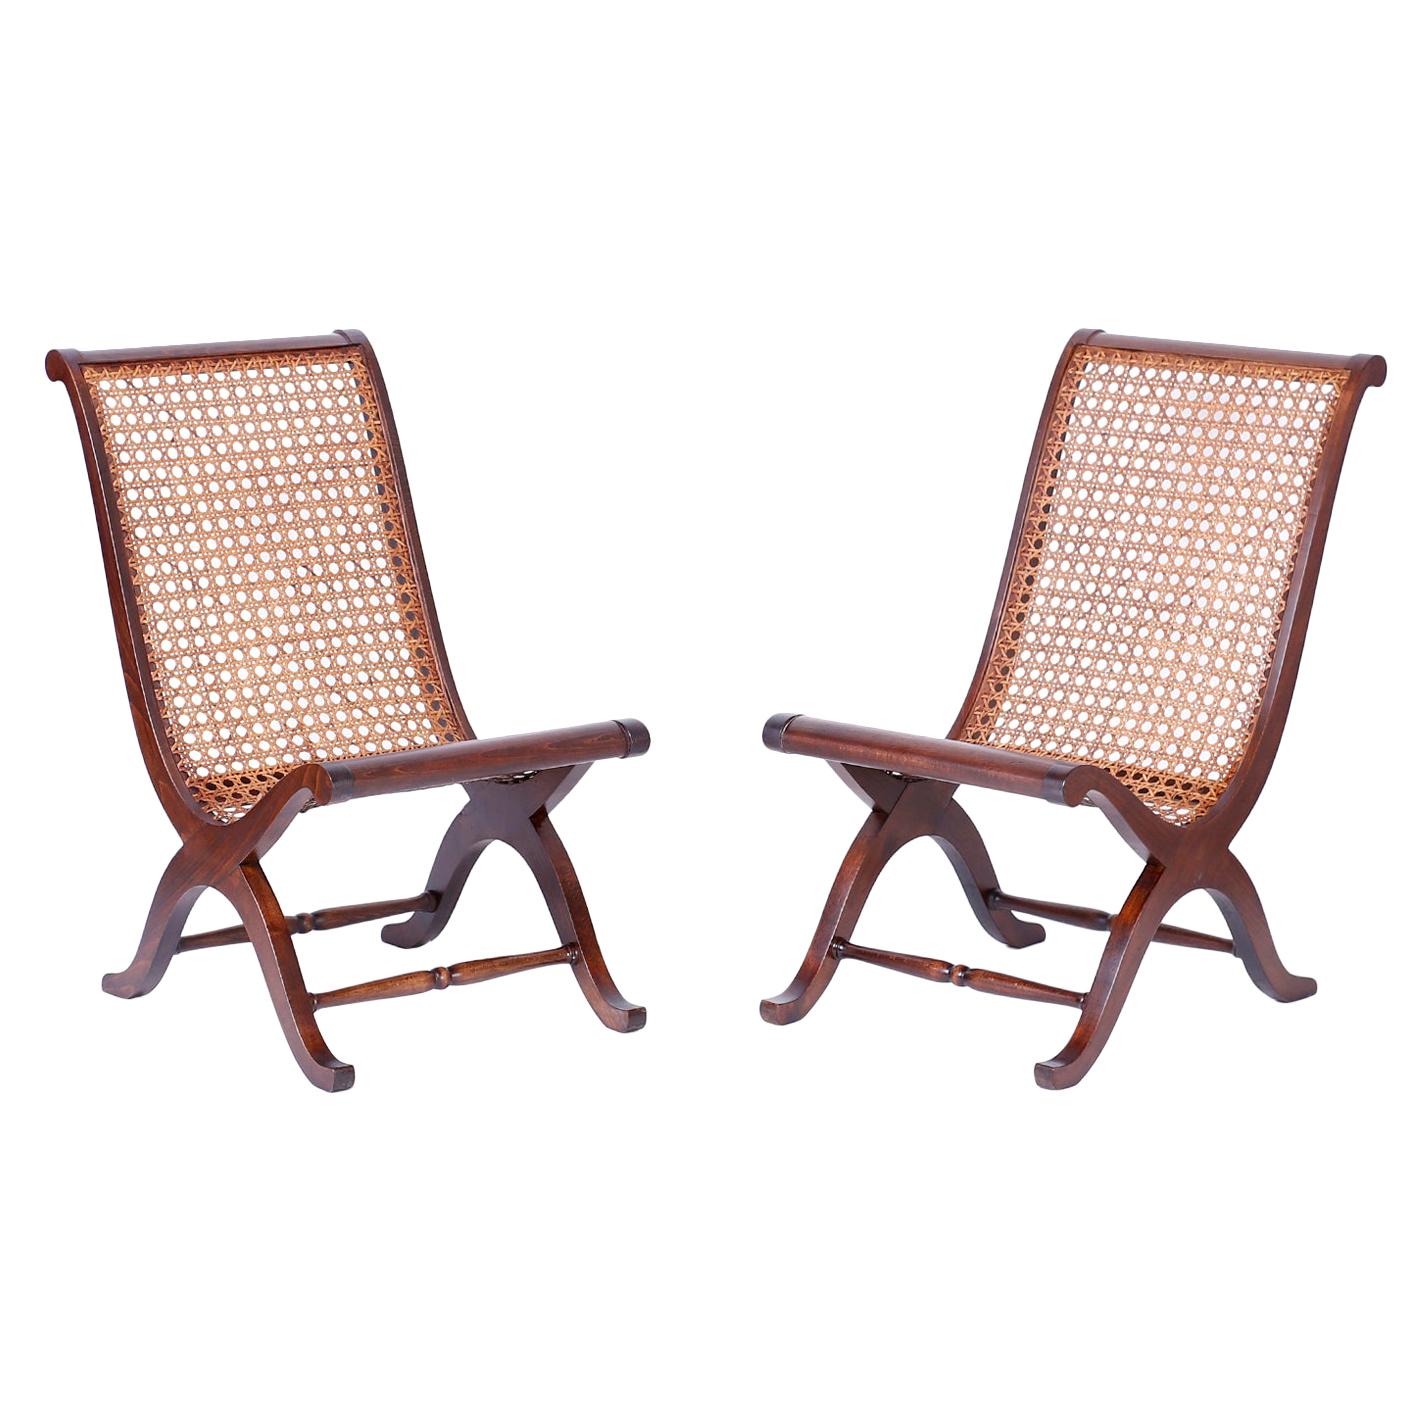 Pair of British Colonial Style Caned Campeche Chairs